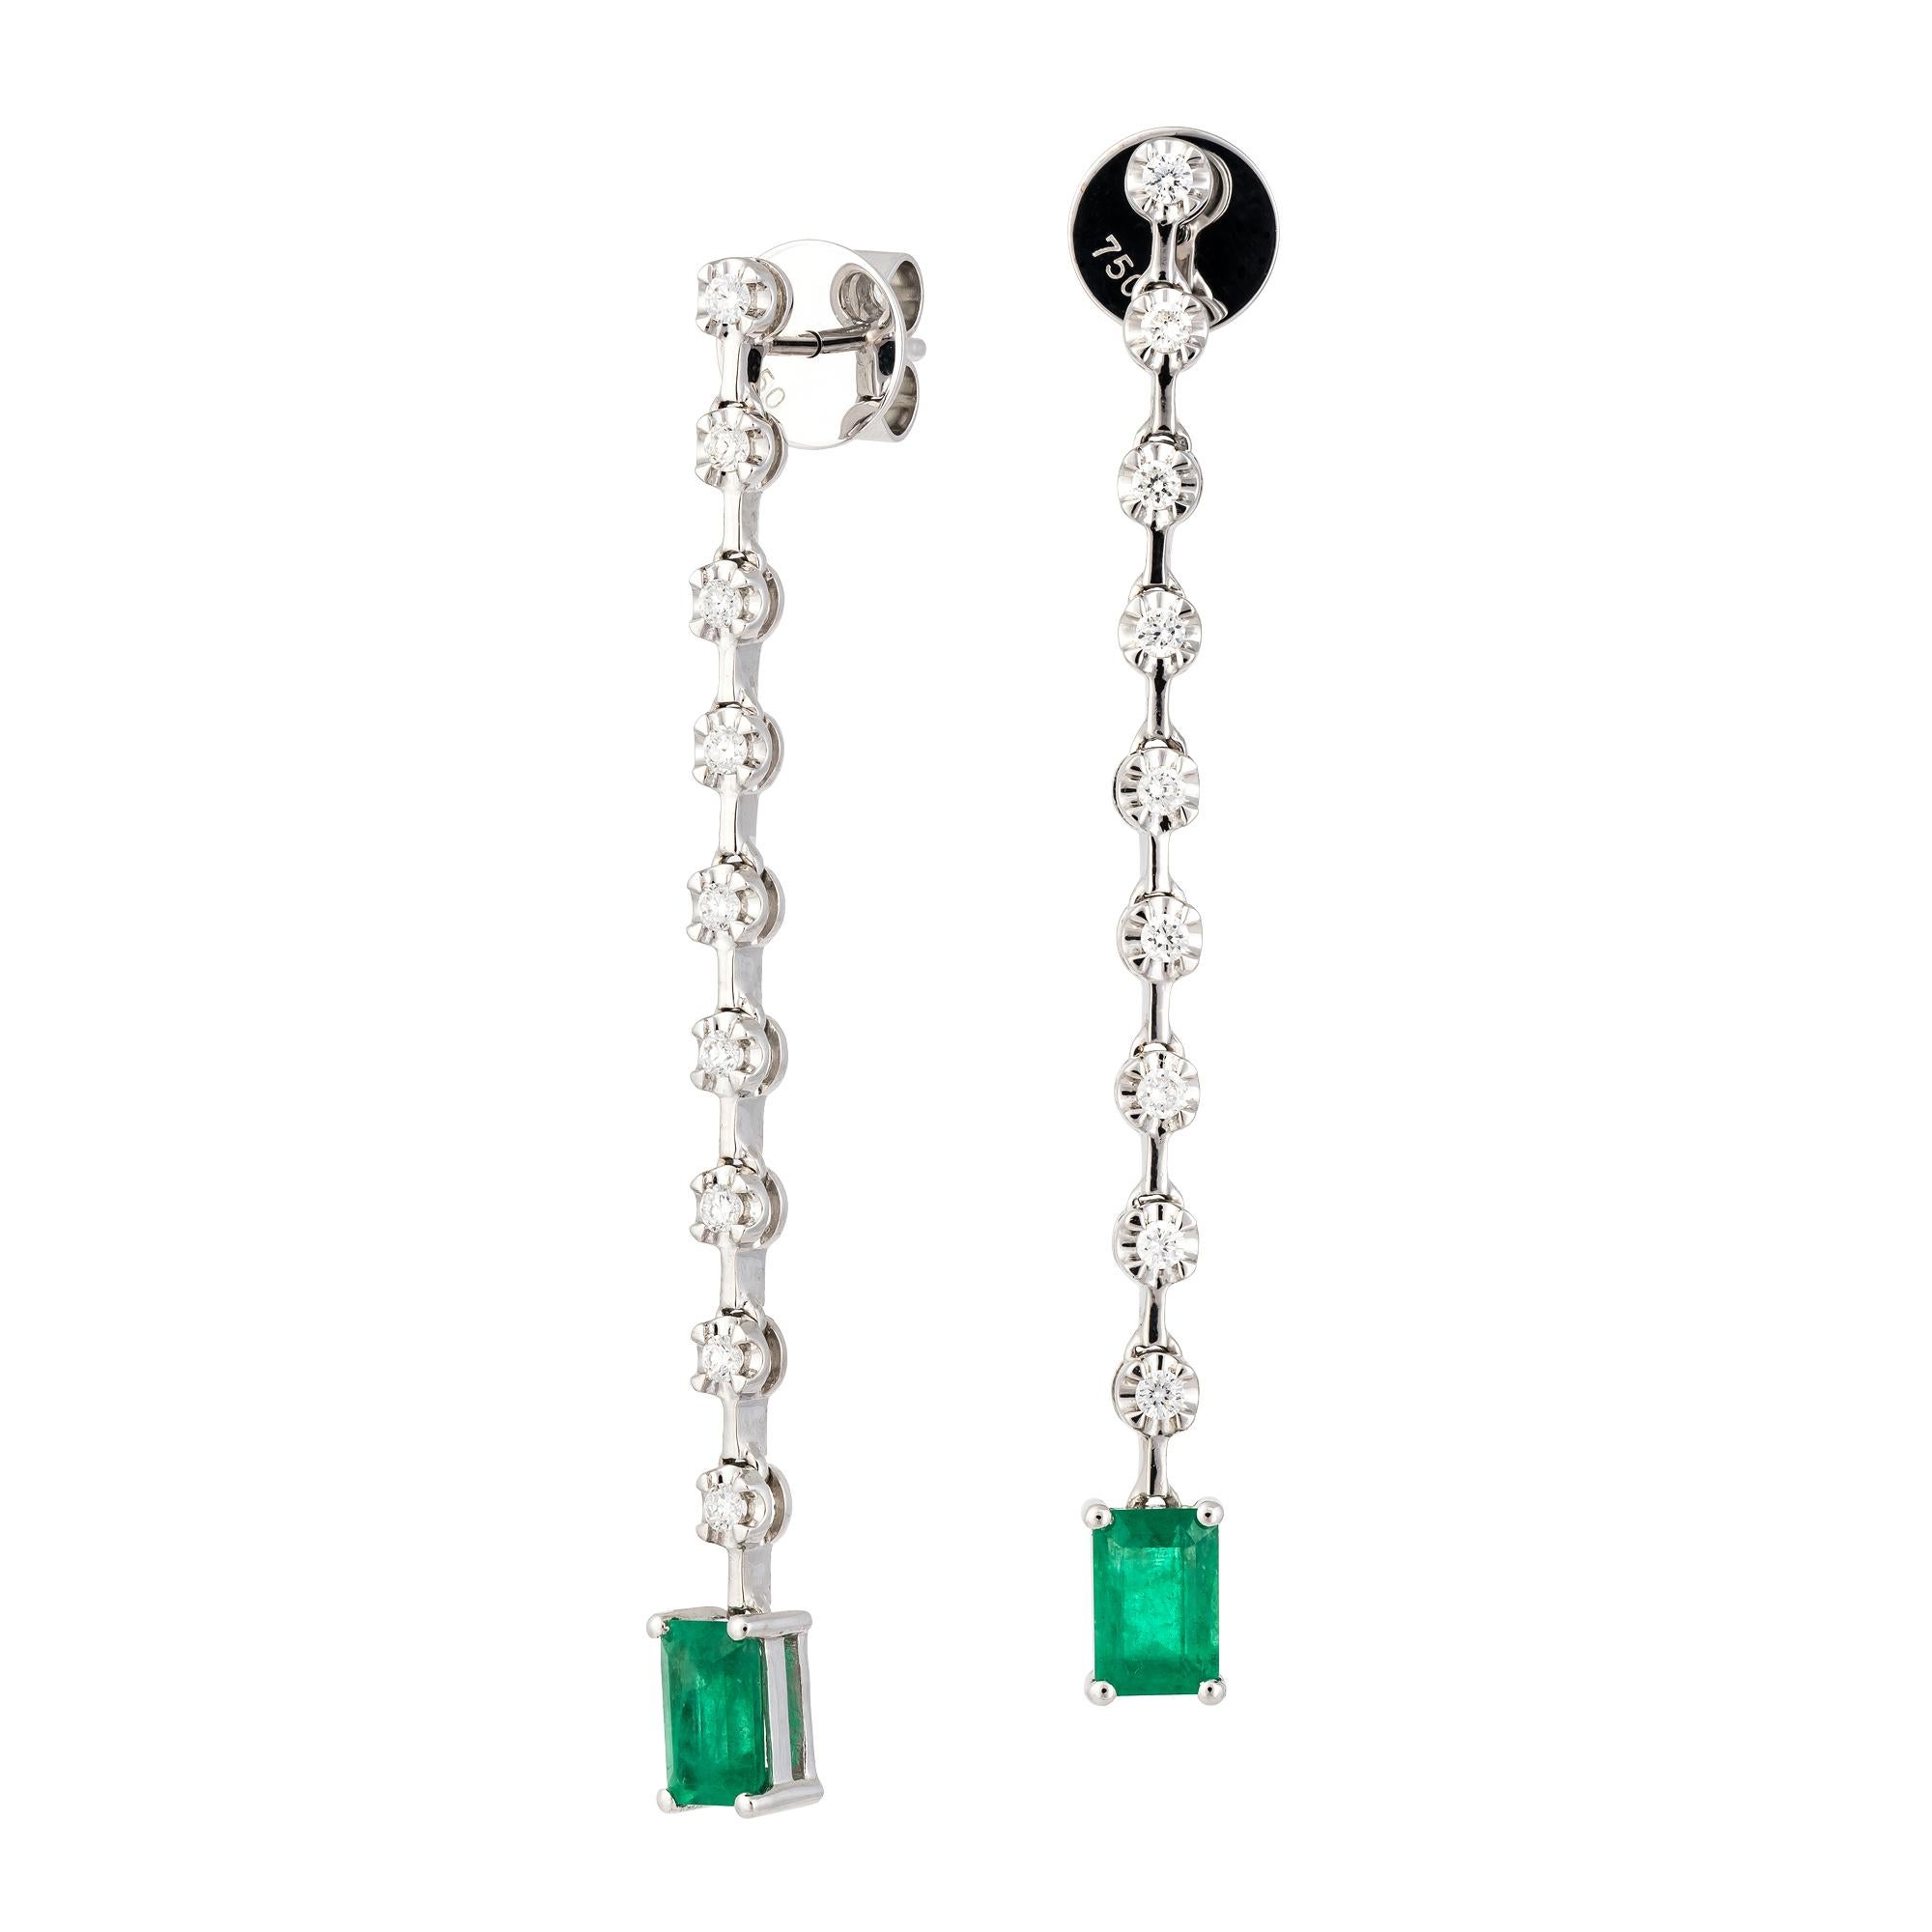 EARRING 18K White Gold Diamond 0.32 Cts/18 Pieces, Emerald 1.07 Cts/2 Pieces